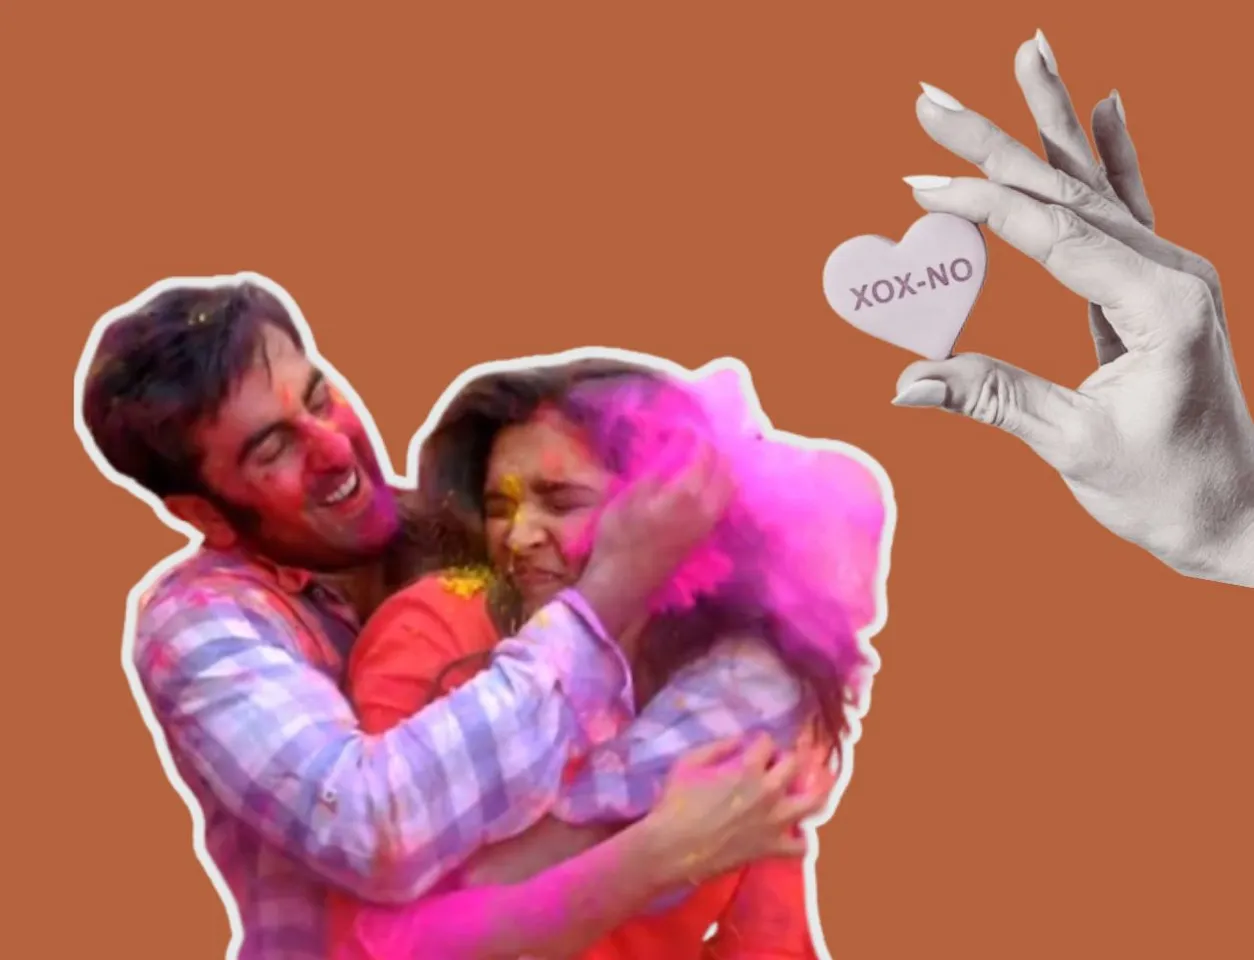 Creators on respecting boundaries and understanding consent during Holi